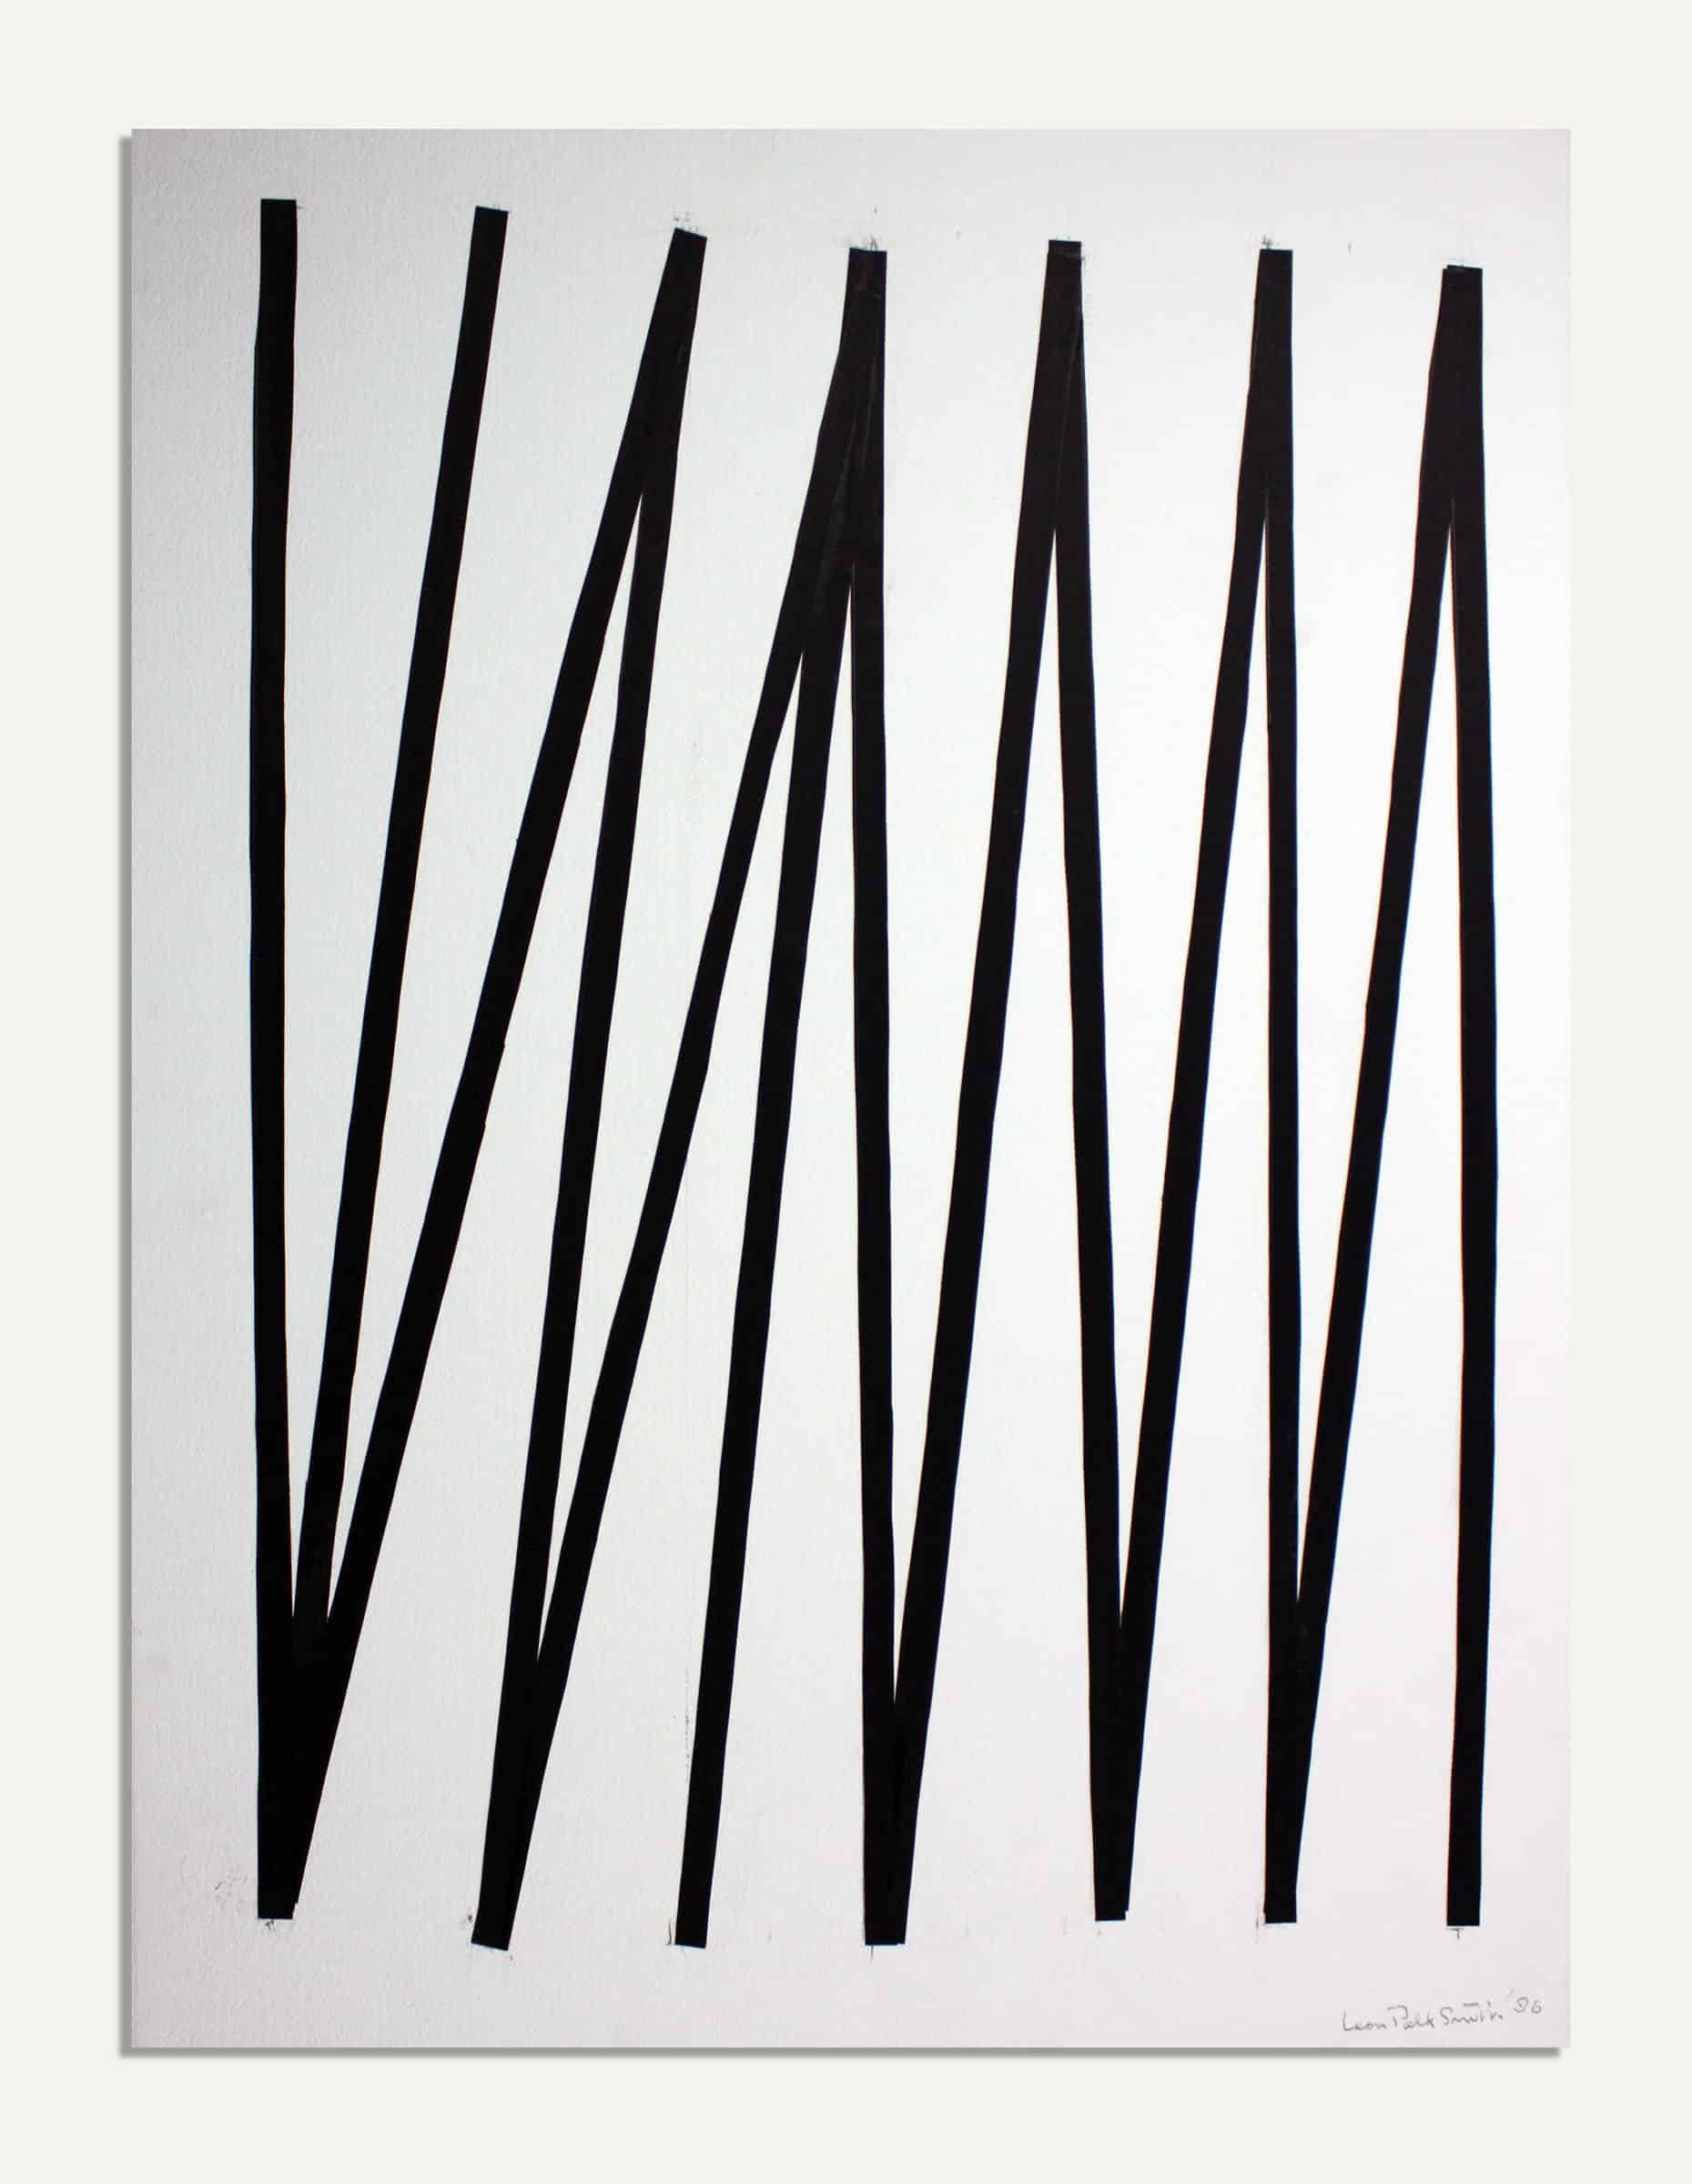 untitled, 1996. Black artist tape on paper. Sheet Size: 30 x 22 1/4 in.